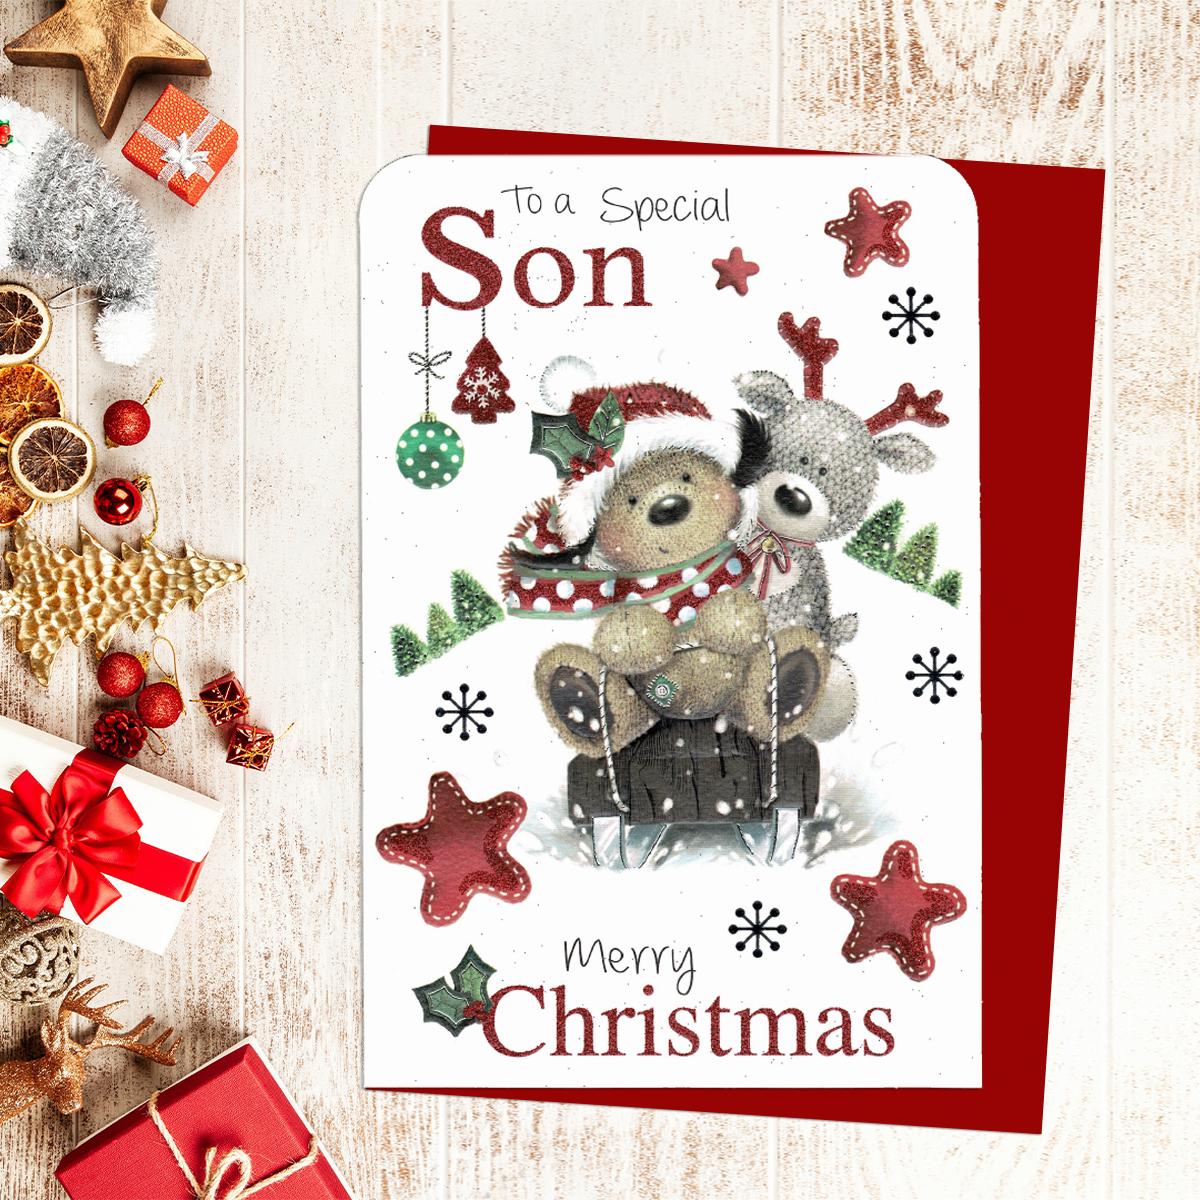 To A Special Son Merry Christmas Showing Two Dogs On A Sled Surrounded By Baubles And Stars. Red Glitter Lettering And Red Envelope Complete The Look